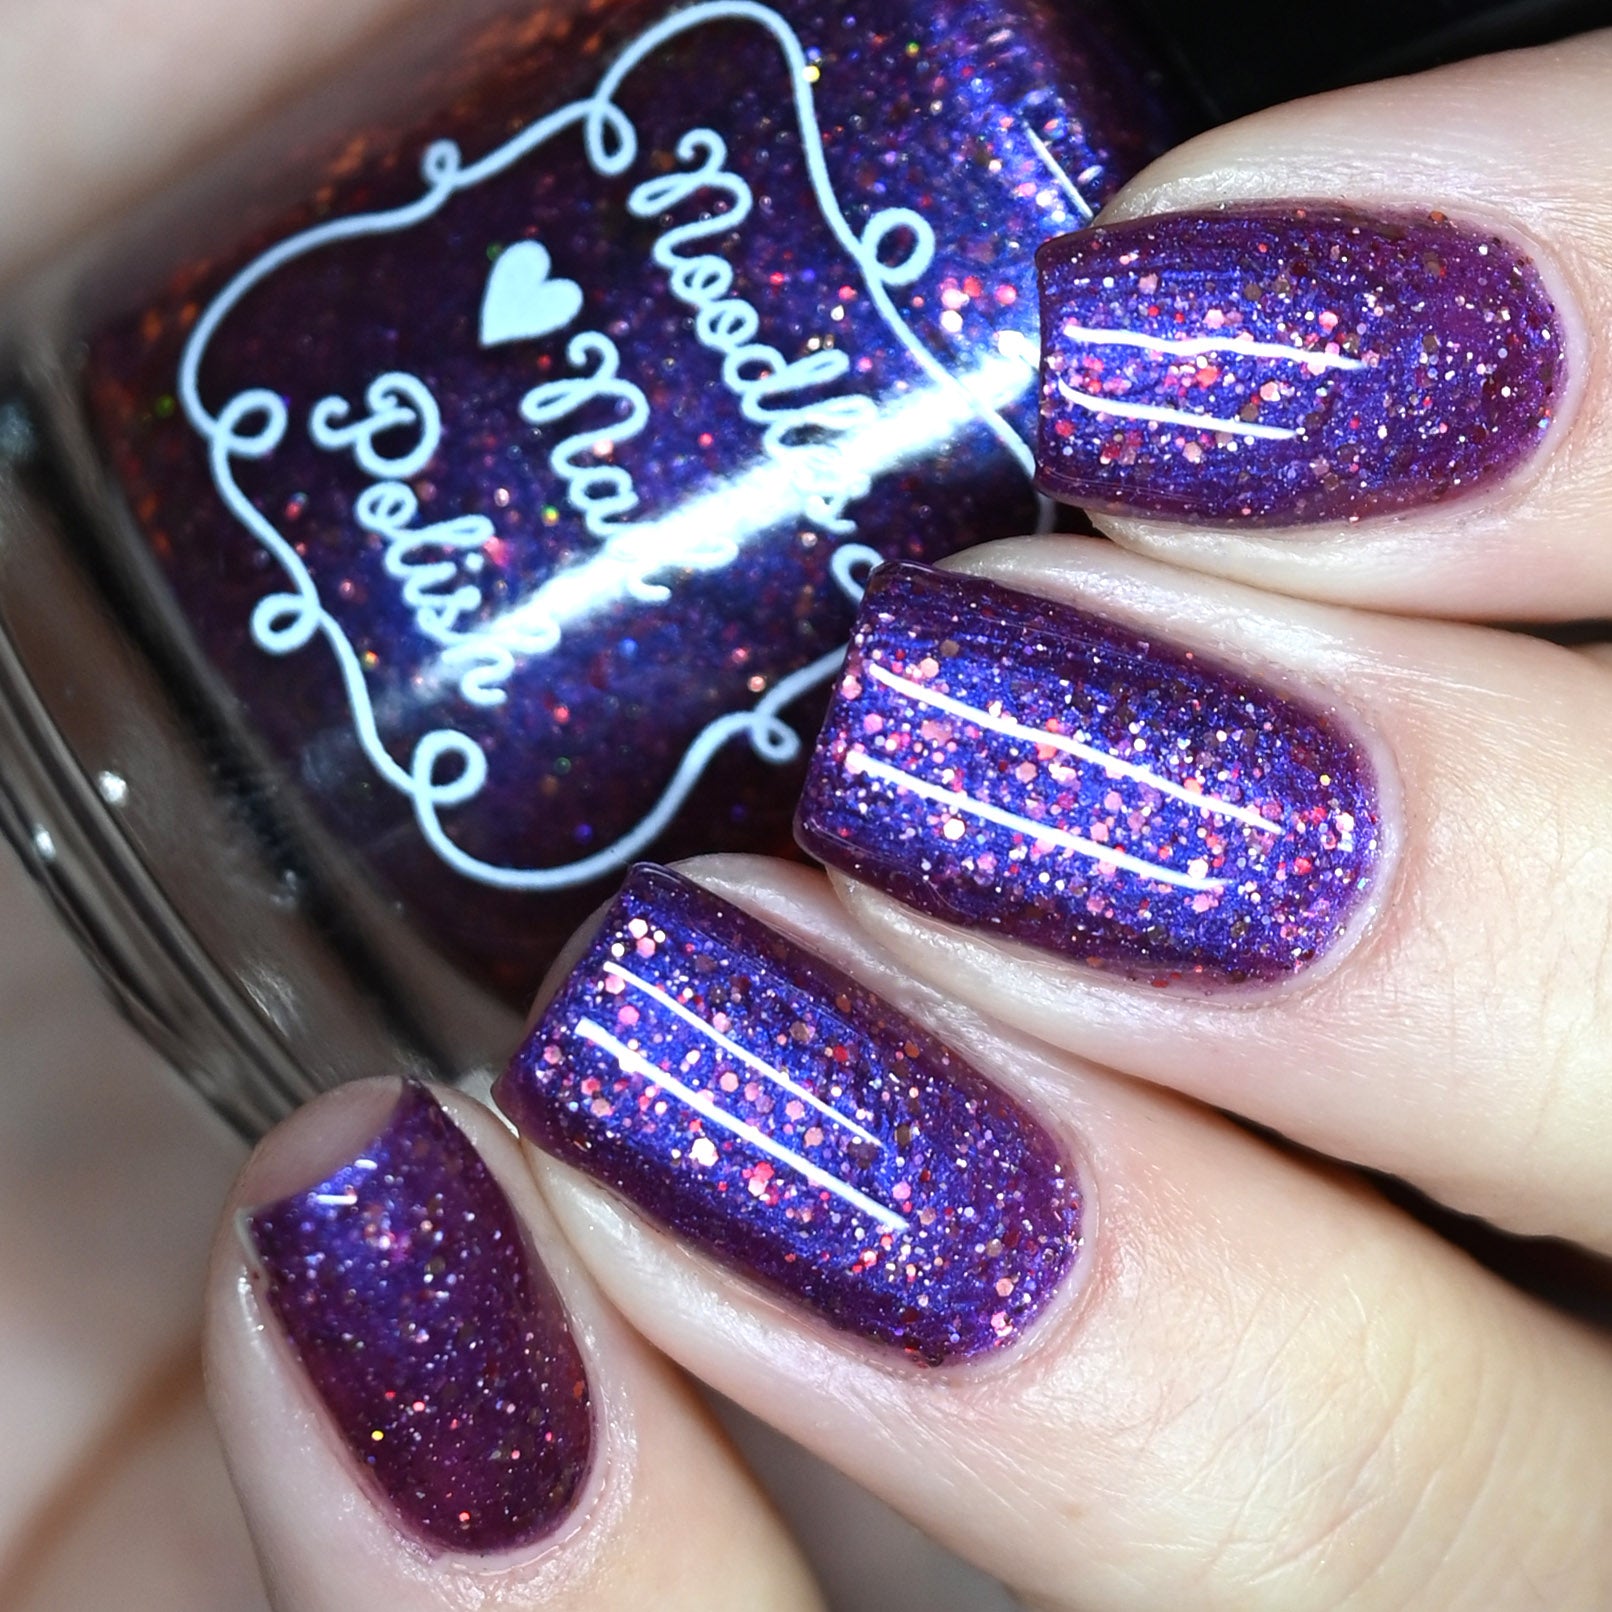 Danglefoot Nail Polish Love You Berry Much & Angel of Music- Swatch & Review